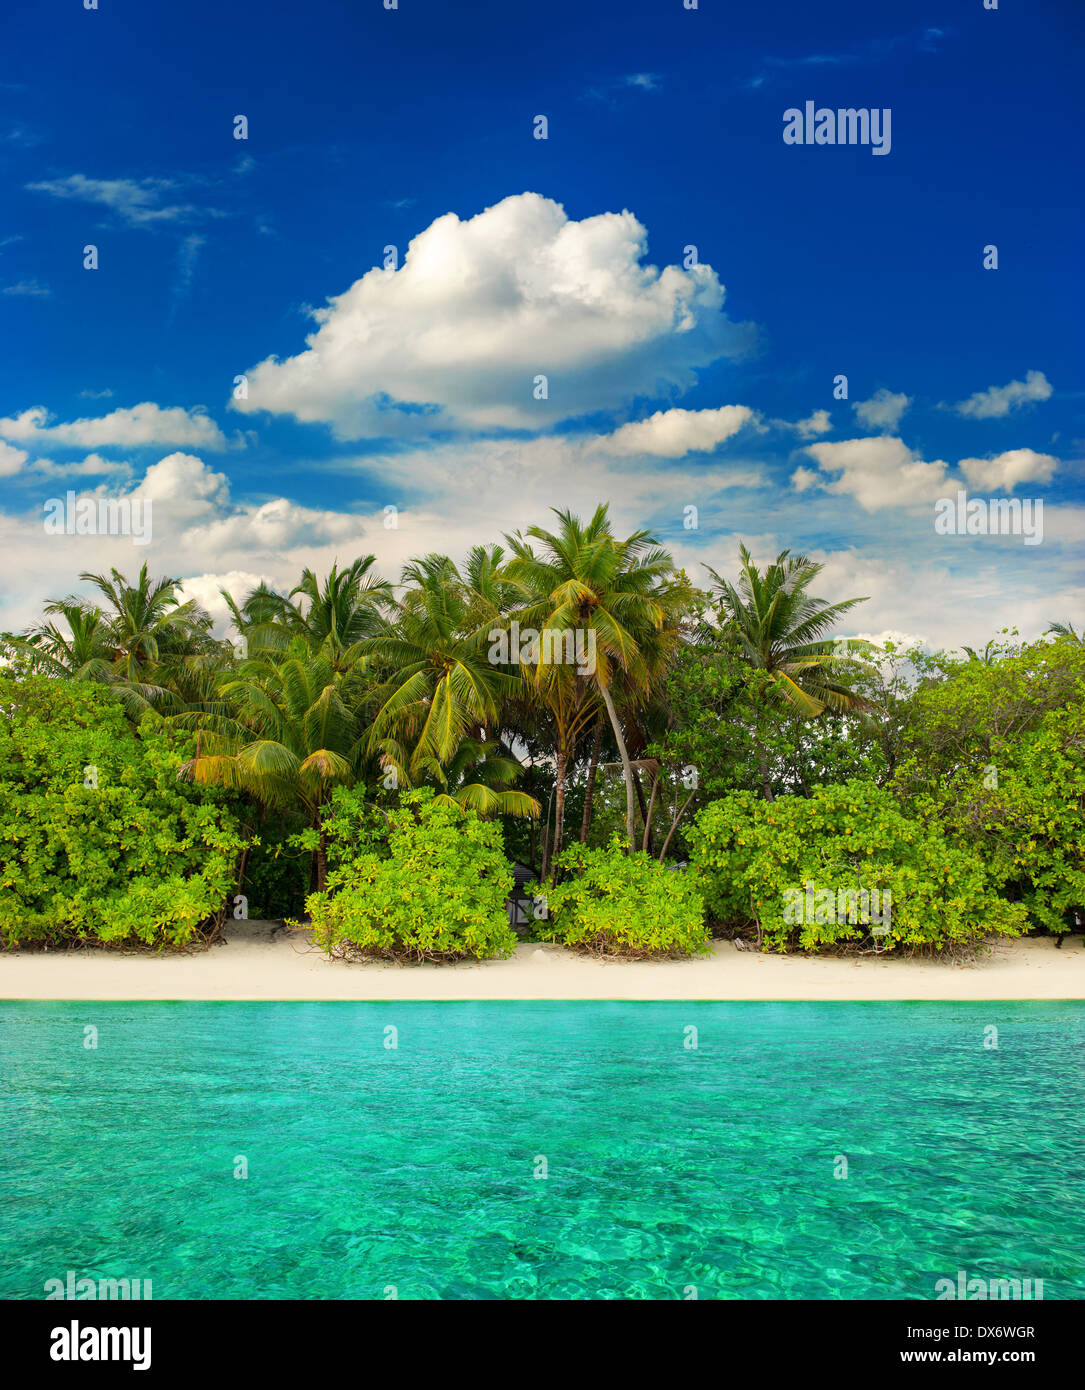 landscape of tropical island beach with palm trees and cloudy blue sky. view from water. travel destination Stock Photo